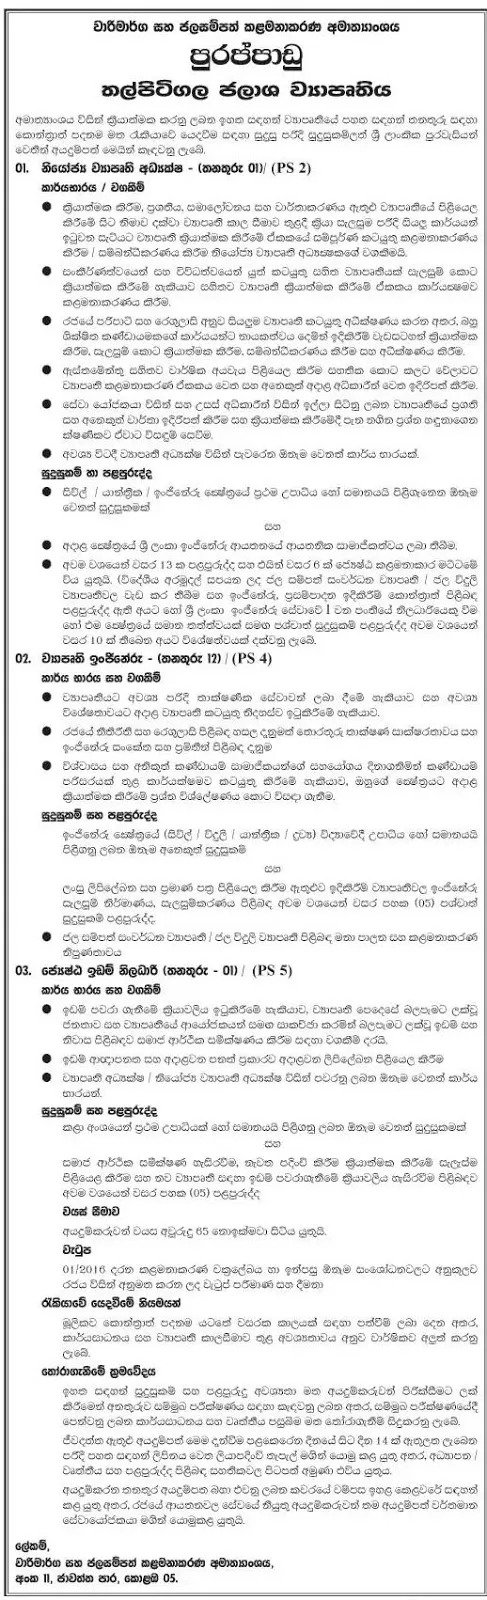 Project Engineer / Senior Land Officer Vacancies in Ministry of Irrigation